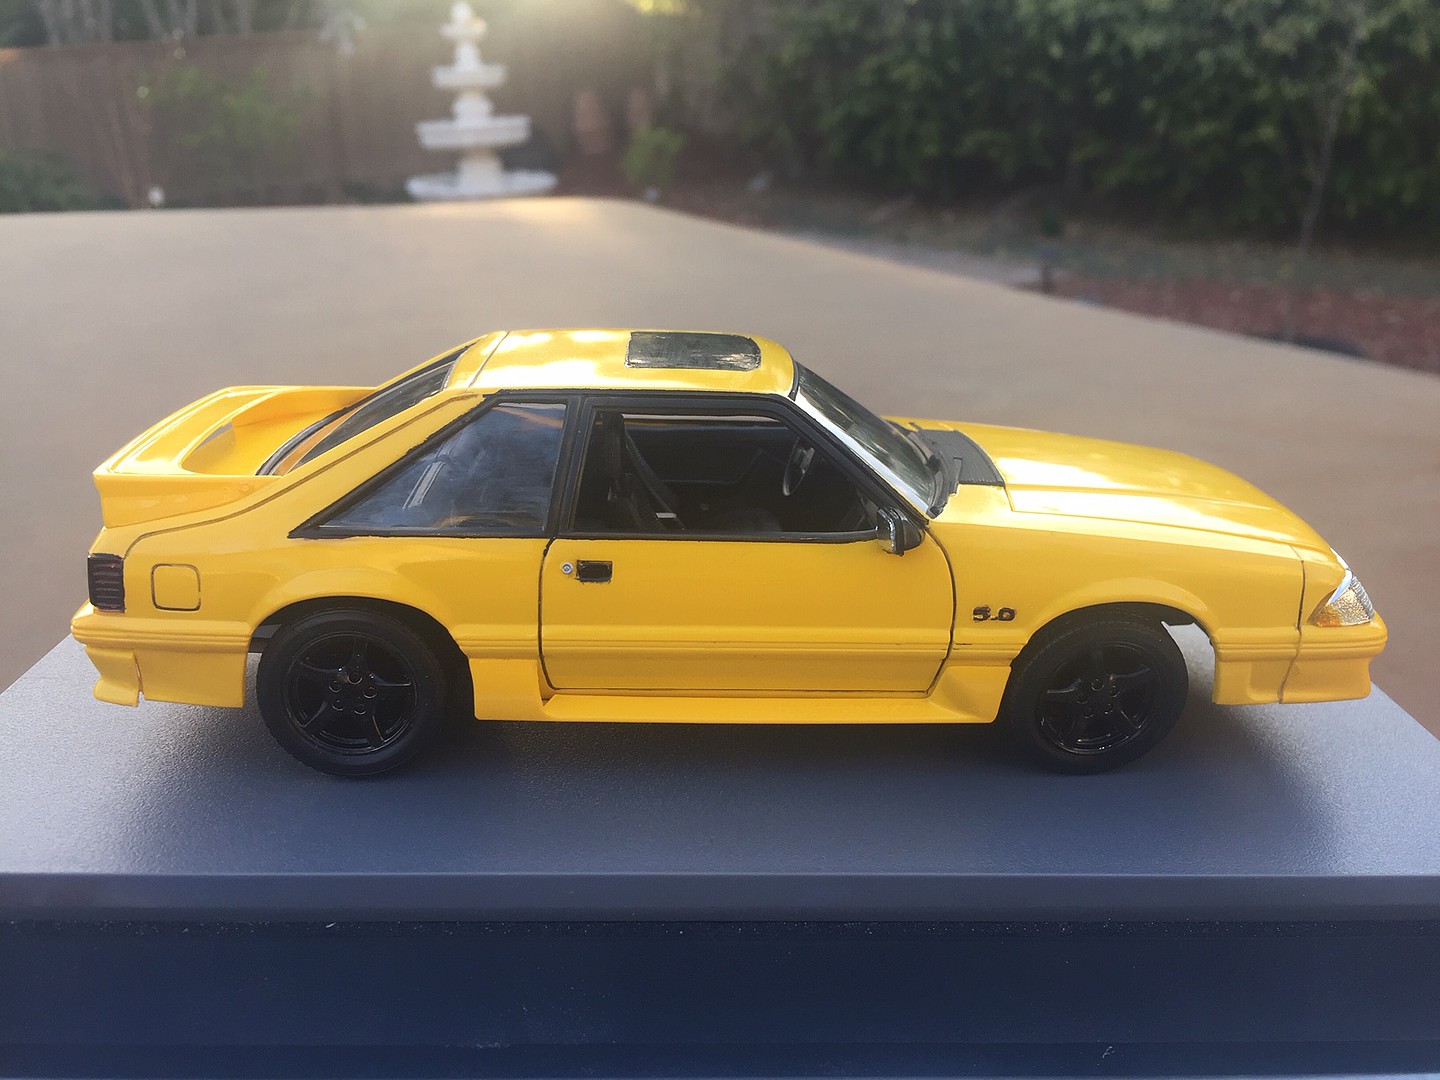 for sale online ATM 1988 Ford MustangGT Model Kit Scale 1/25 - AMT1216 